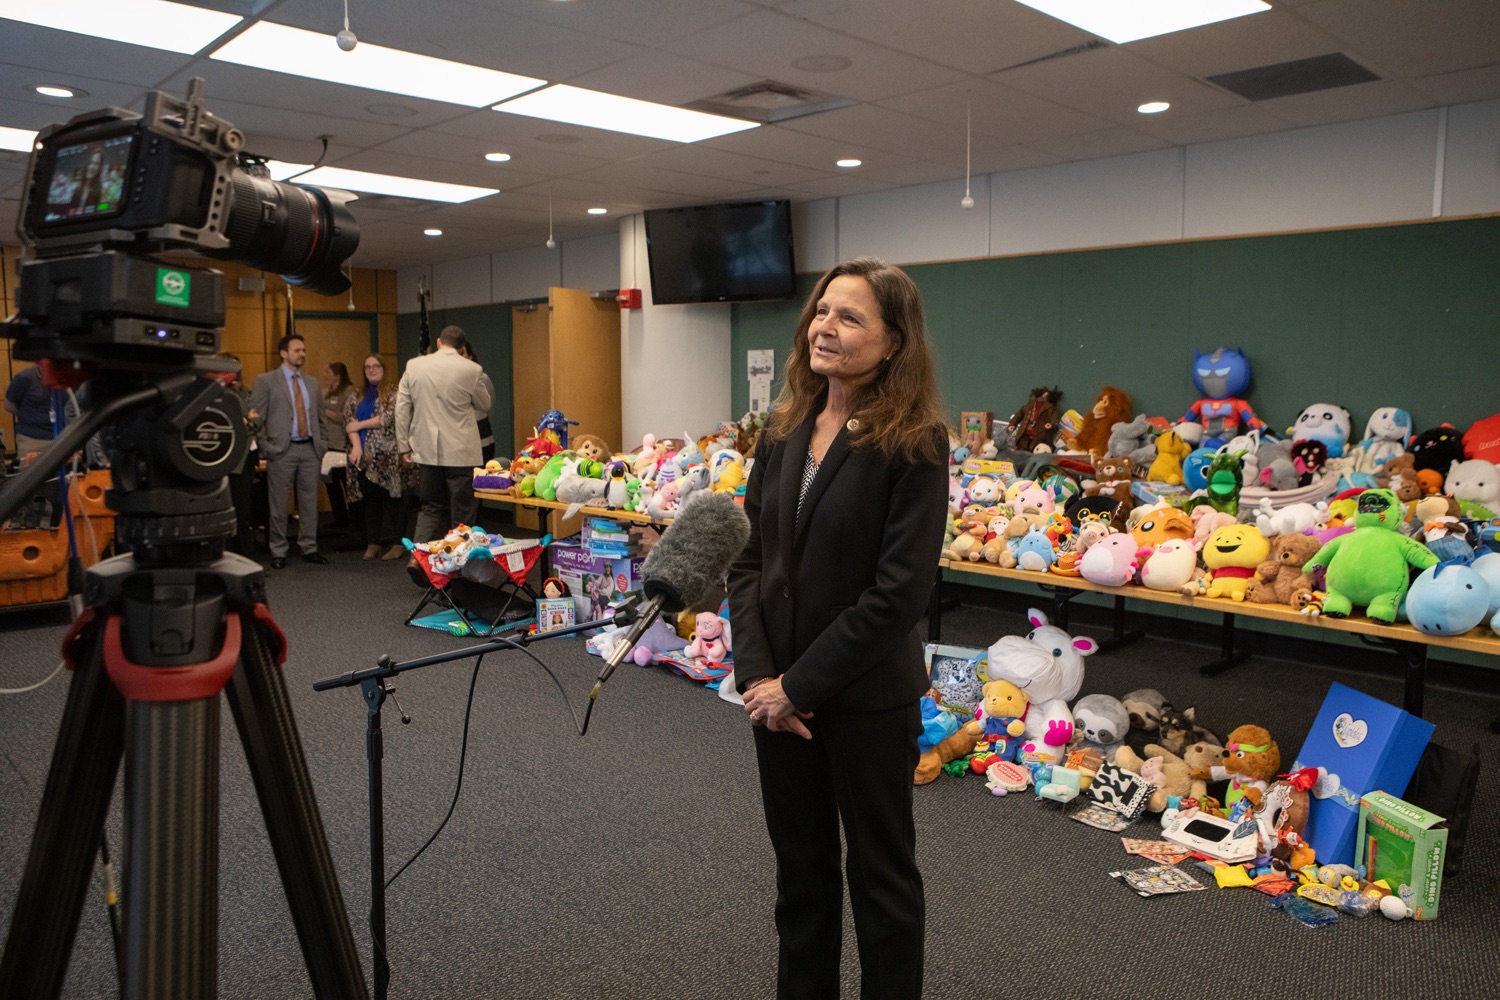 The Pennsylvania Departments of Labor & Industry (L&I) and Human Services (DHS) kicked off the 2023 holiday season Wednesday with an annual donation of stuffed toys collected throughout the year by L&I during routine safety inspections. The toys will be distributed to Pennsylvania families through DHS Holiday Wish program. . ."We inspect these stuffed toys throughout the year to ensure their safety for all children in Pennsylvania. Its become a tradition at L&I to donate the inspected toys to the Holiday Wish program because we get to brighten the holidays for a few children while reminding parents and retailers of the importance of toy safety, L&I Secretary Nancy A. Walker. I encourage any Pennsylvanian who can give a little extra this year to consider donating to a holiday charity. The joy and happiness through a simple act of kindness can lead to lifelong memories for countless Pennsylvania children.<br><a href="https://filesource.amperwave.net/commonwealthofpa/photo/24018_LI_StuffedToys_ERD_022.jpg" target="_blank">⇣ Download Photo</a>